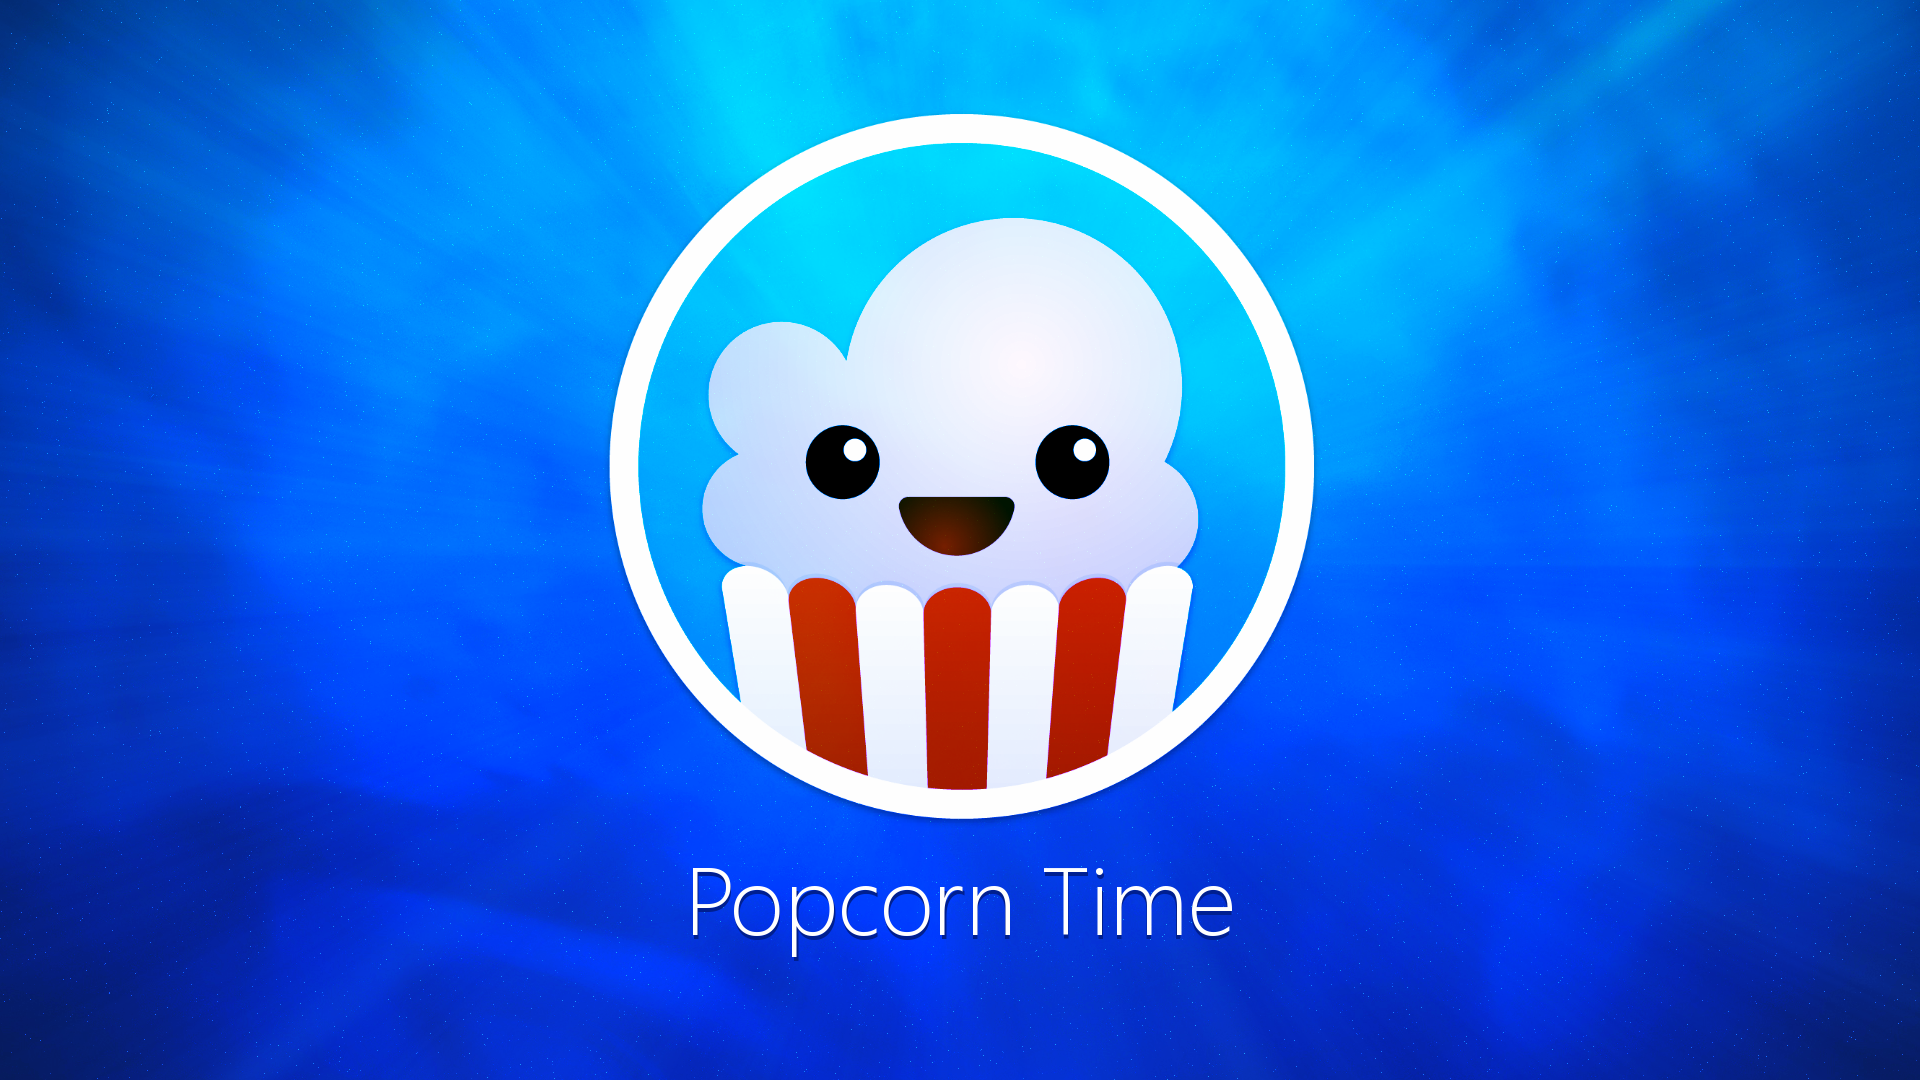 popcorn_time_wallpaper____blue_space__by_chrisfr06-d8g5x2a.png